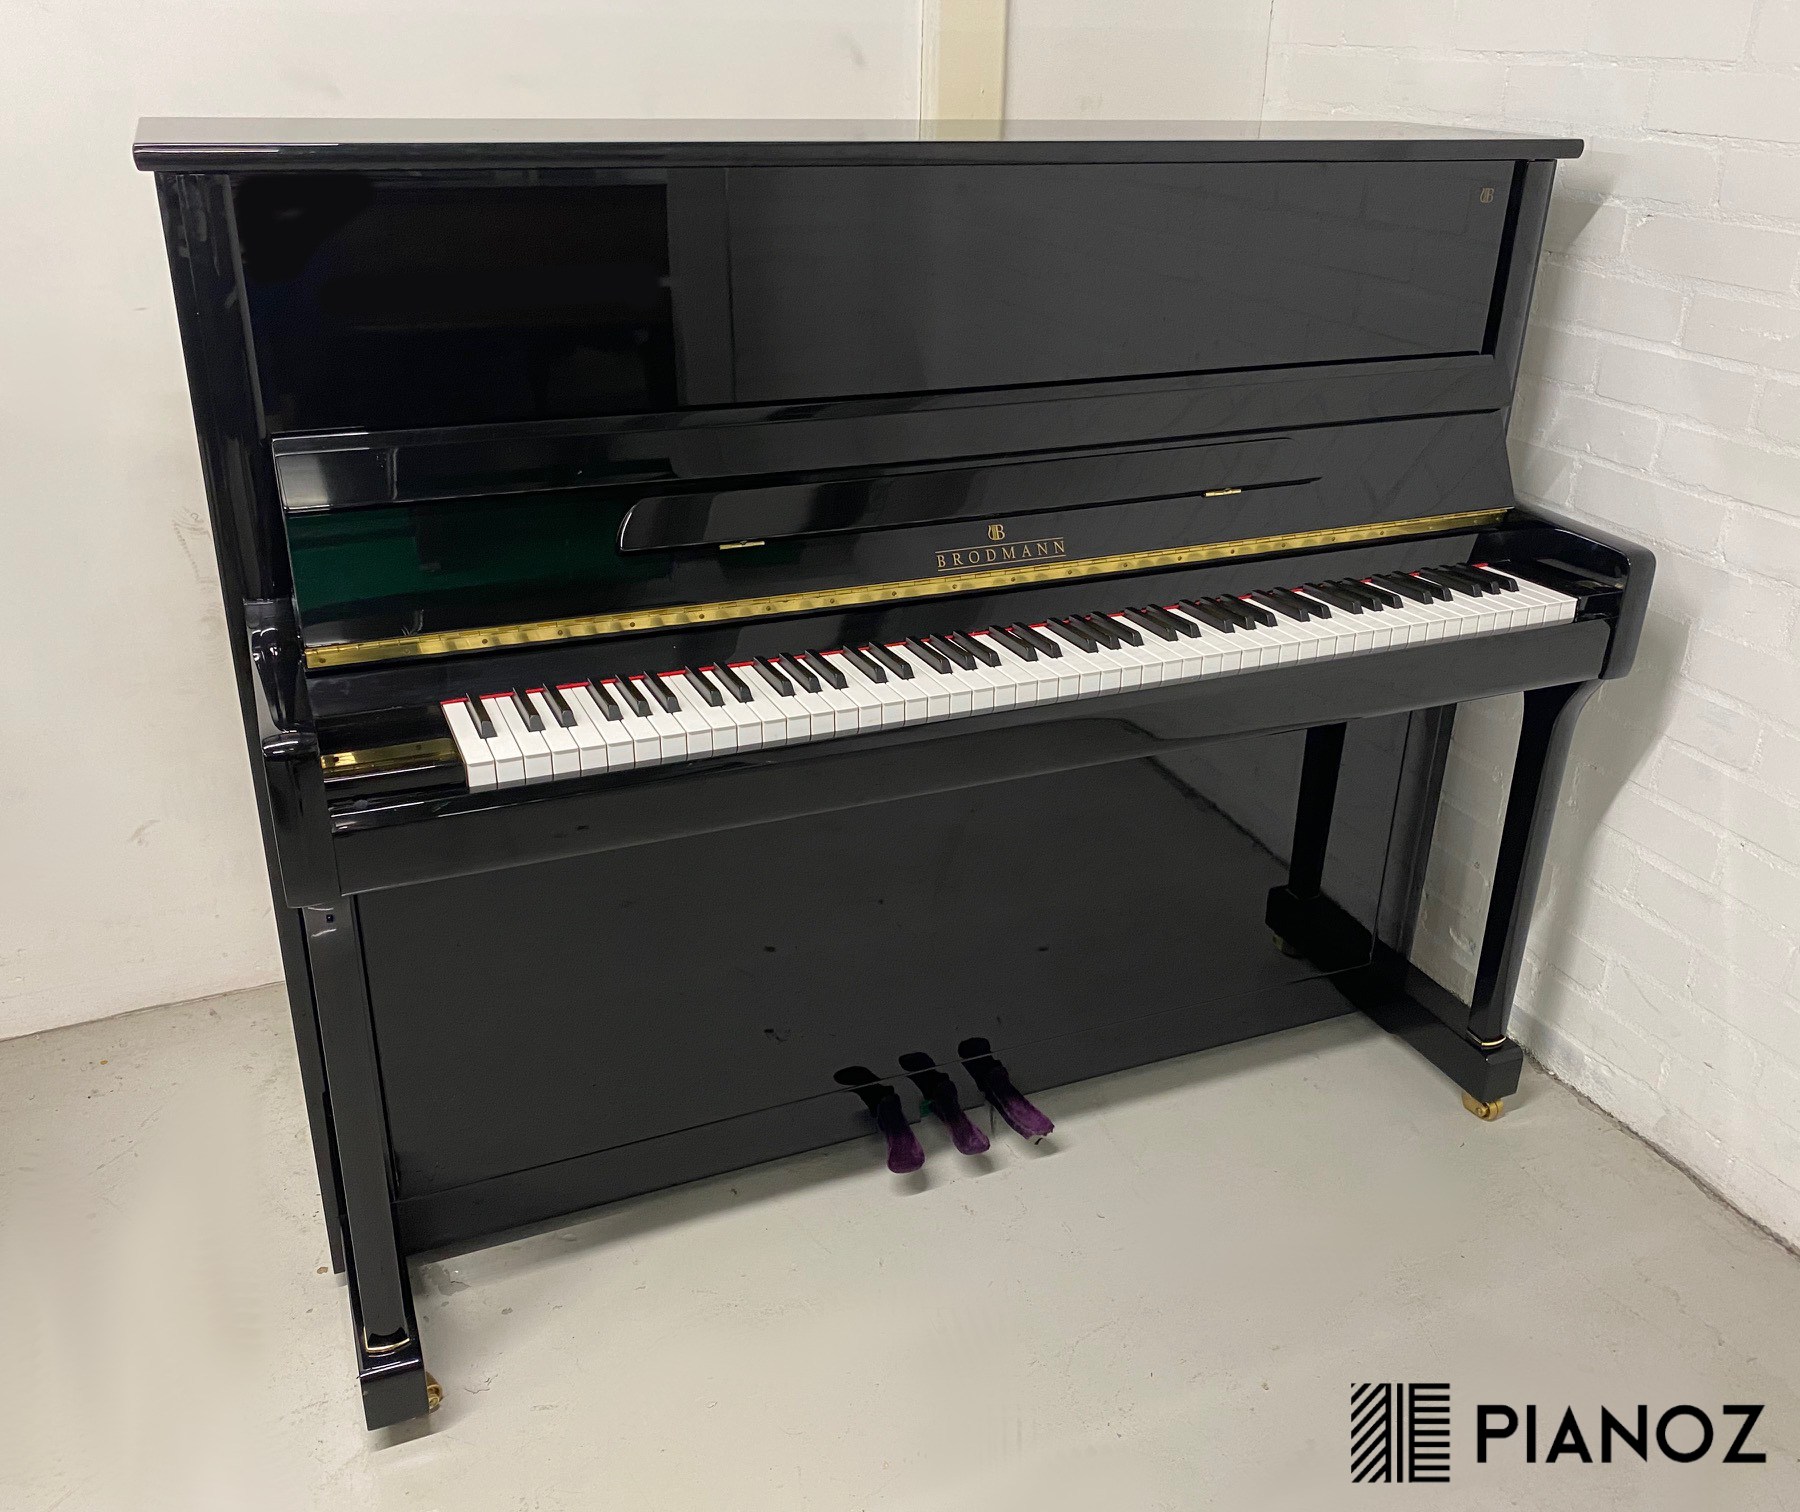 Brodmann 118 Upright Piano piano for sale in UK